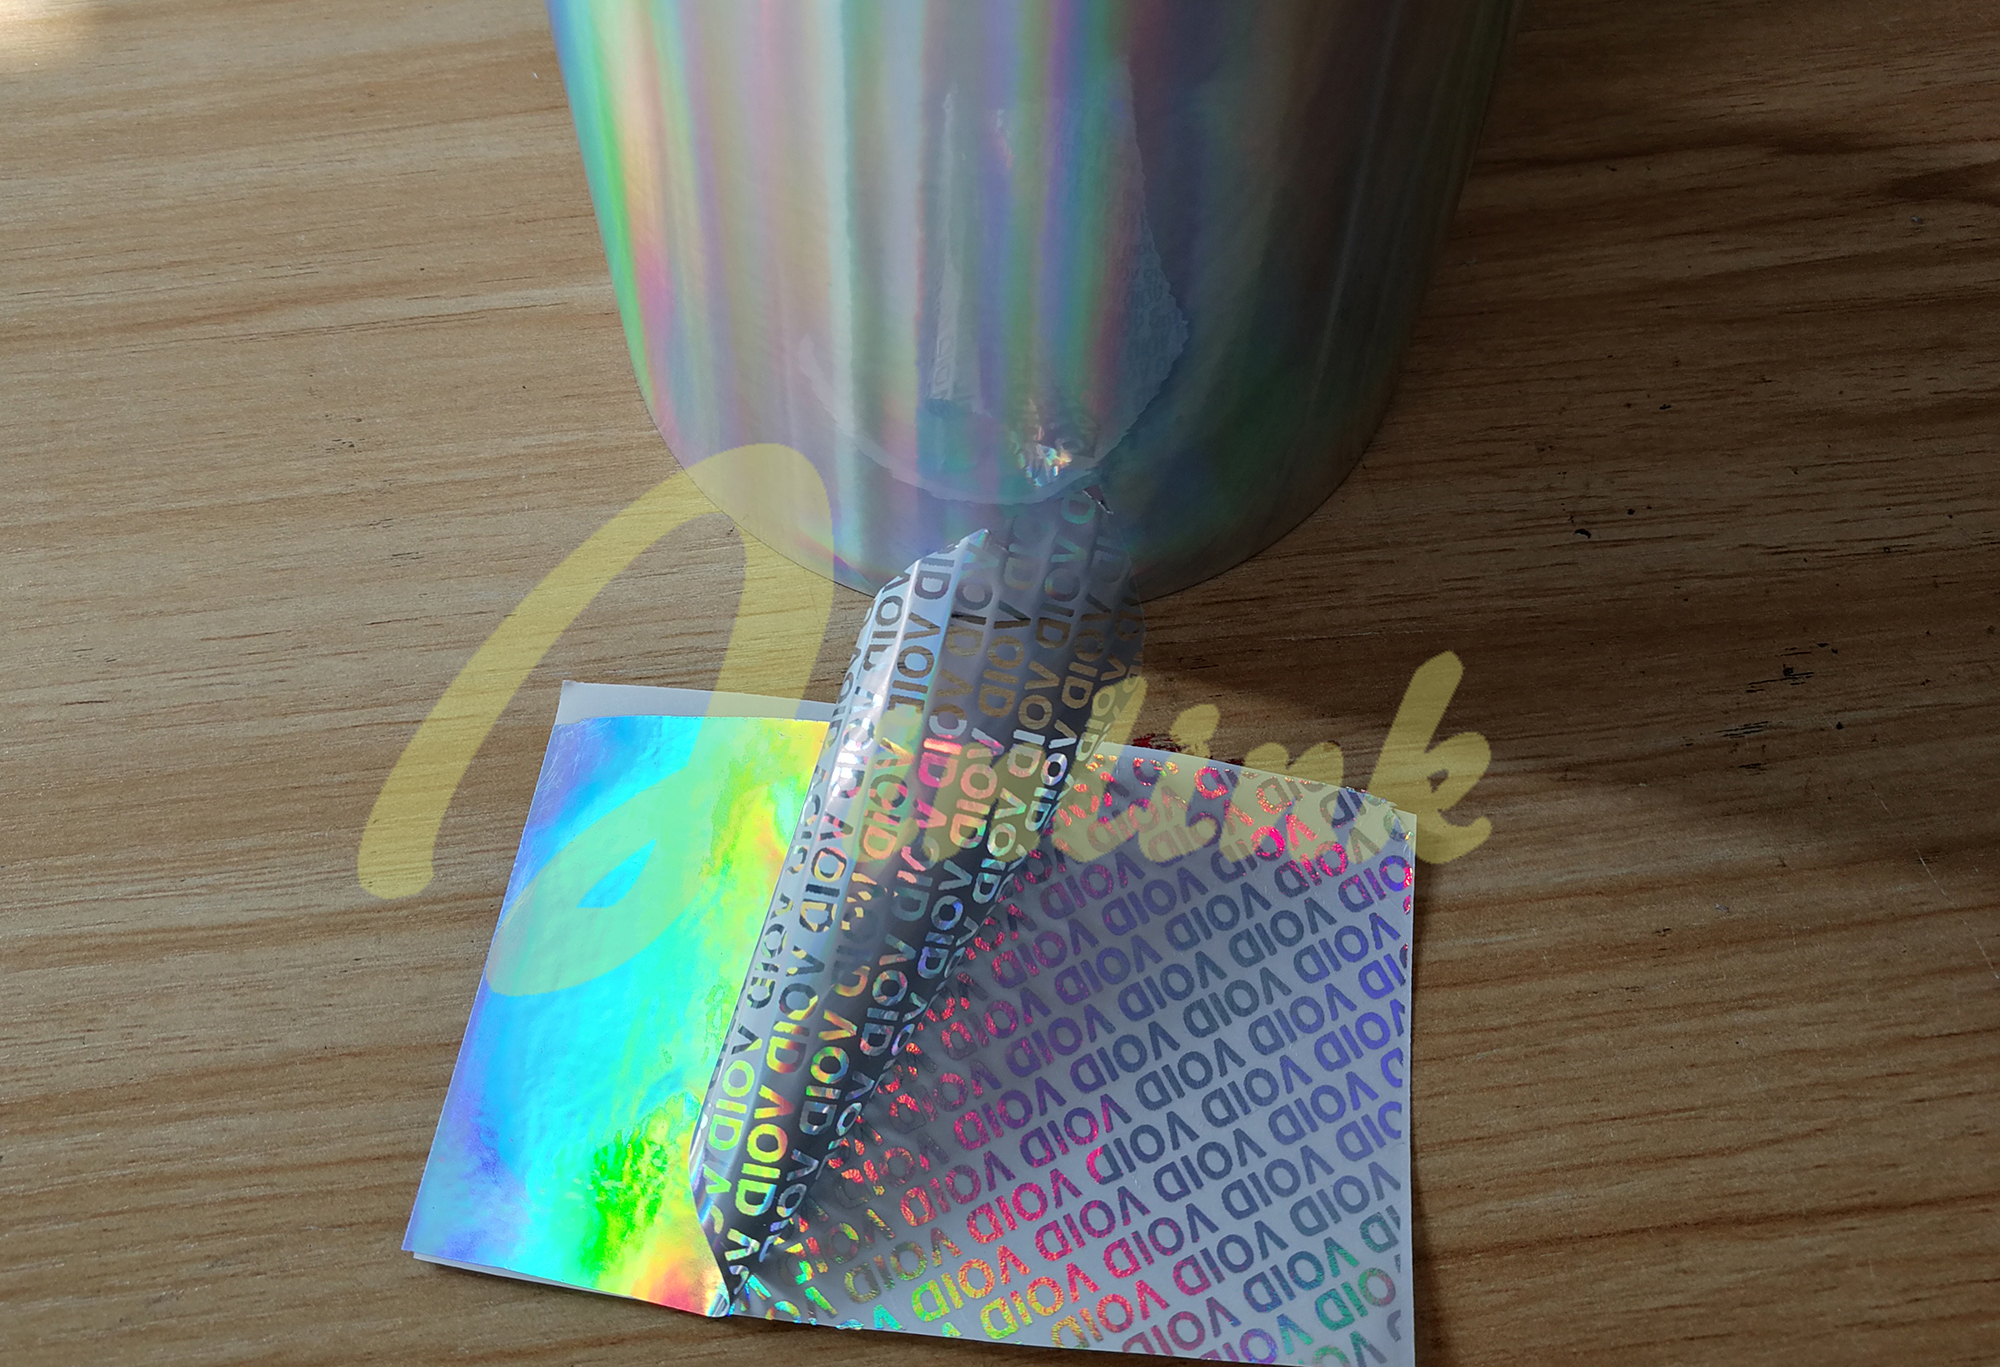 Total transfer tamper evident holographic laser label material with Low residue 